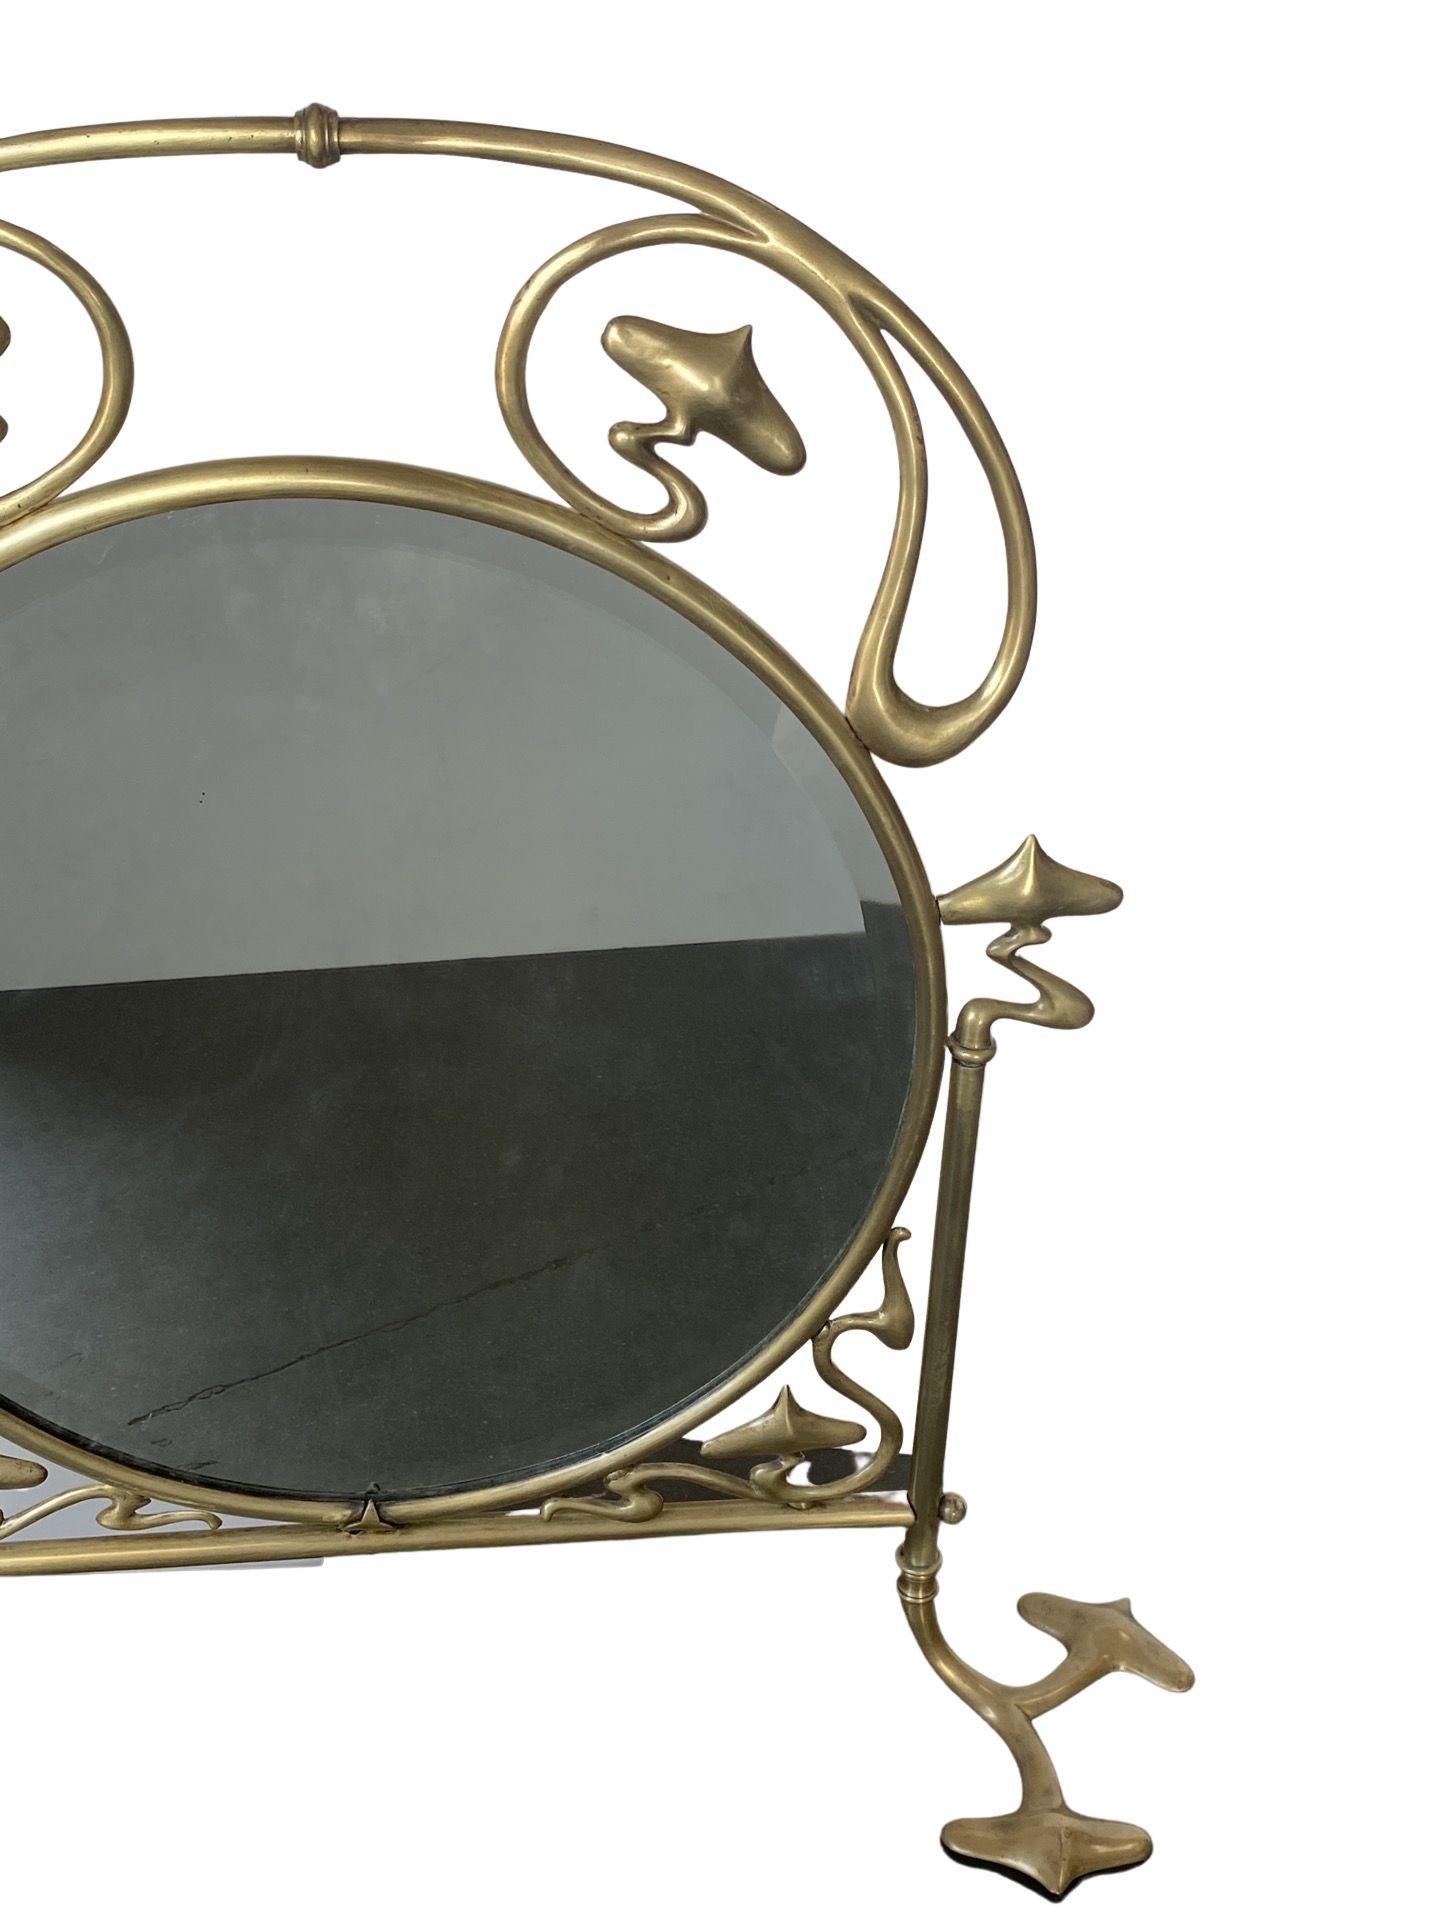 French Art Nouveau Brass Fire Screen with Mirror In Excellent Condition For Sale In Van Nuys, CA